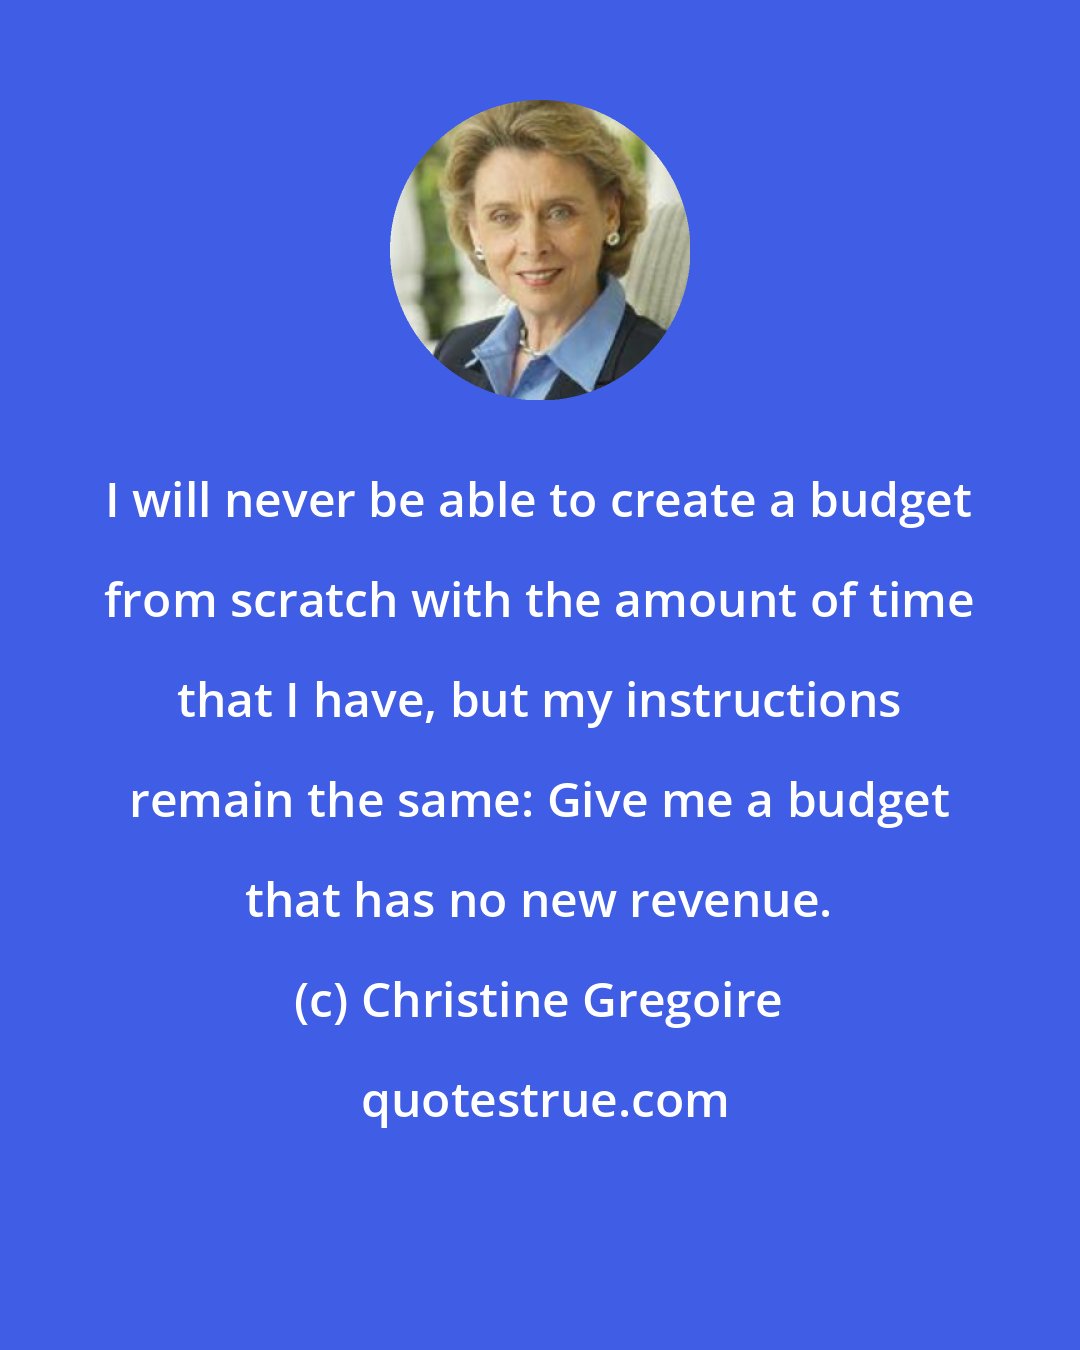 Christine Gregoire: I will never be able to create a budget from scratch with the amount of time that I have, but my instructions remain the same: Give me a budget that has no new revenue.